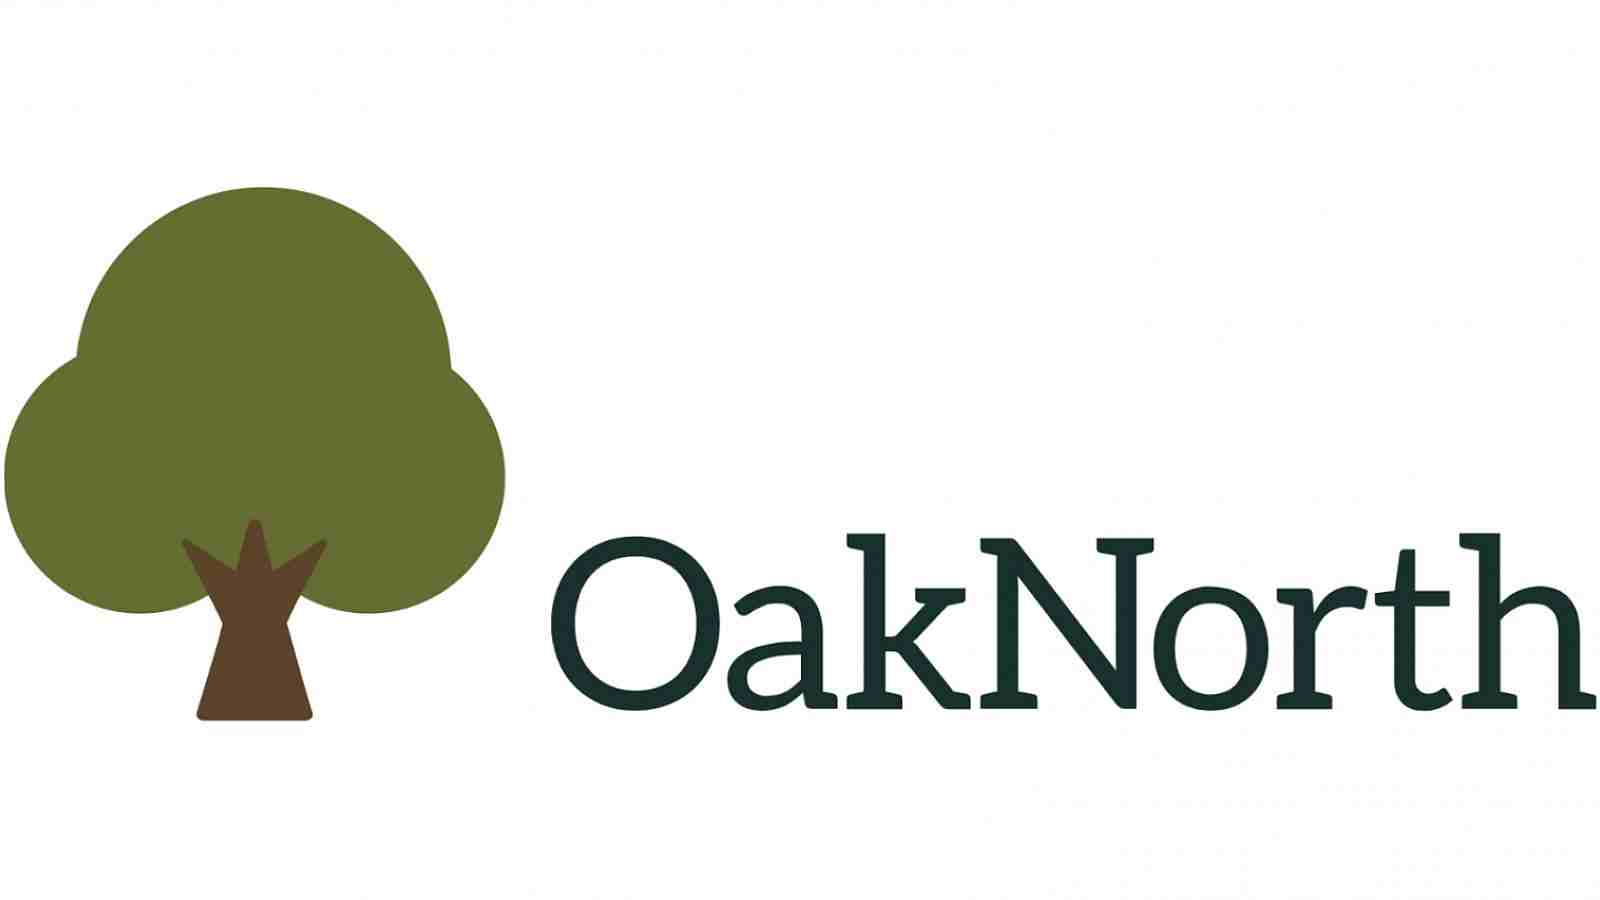 OakNorth Bank is a UK bank for small and medium-sized companies that provides business and property loans.